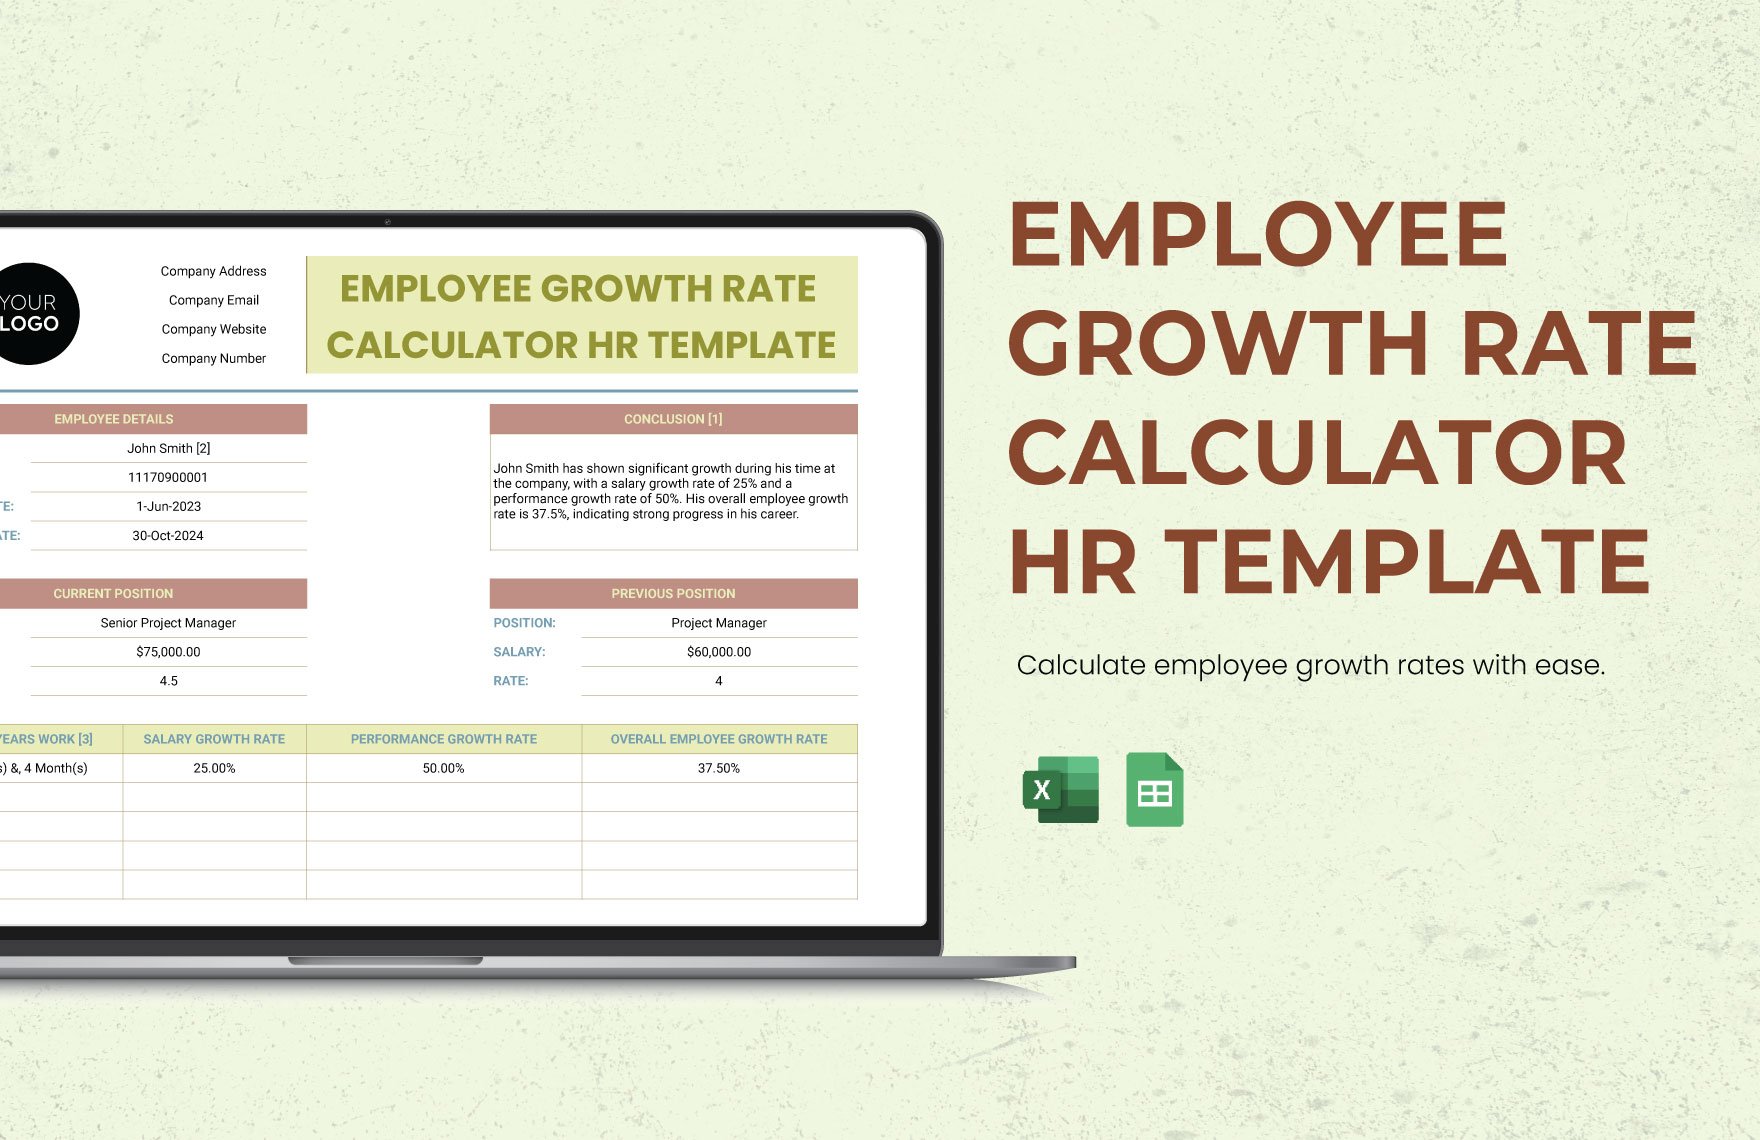 Employee Growth Rate Calculator HR Template